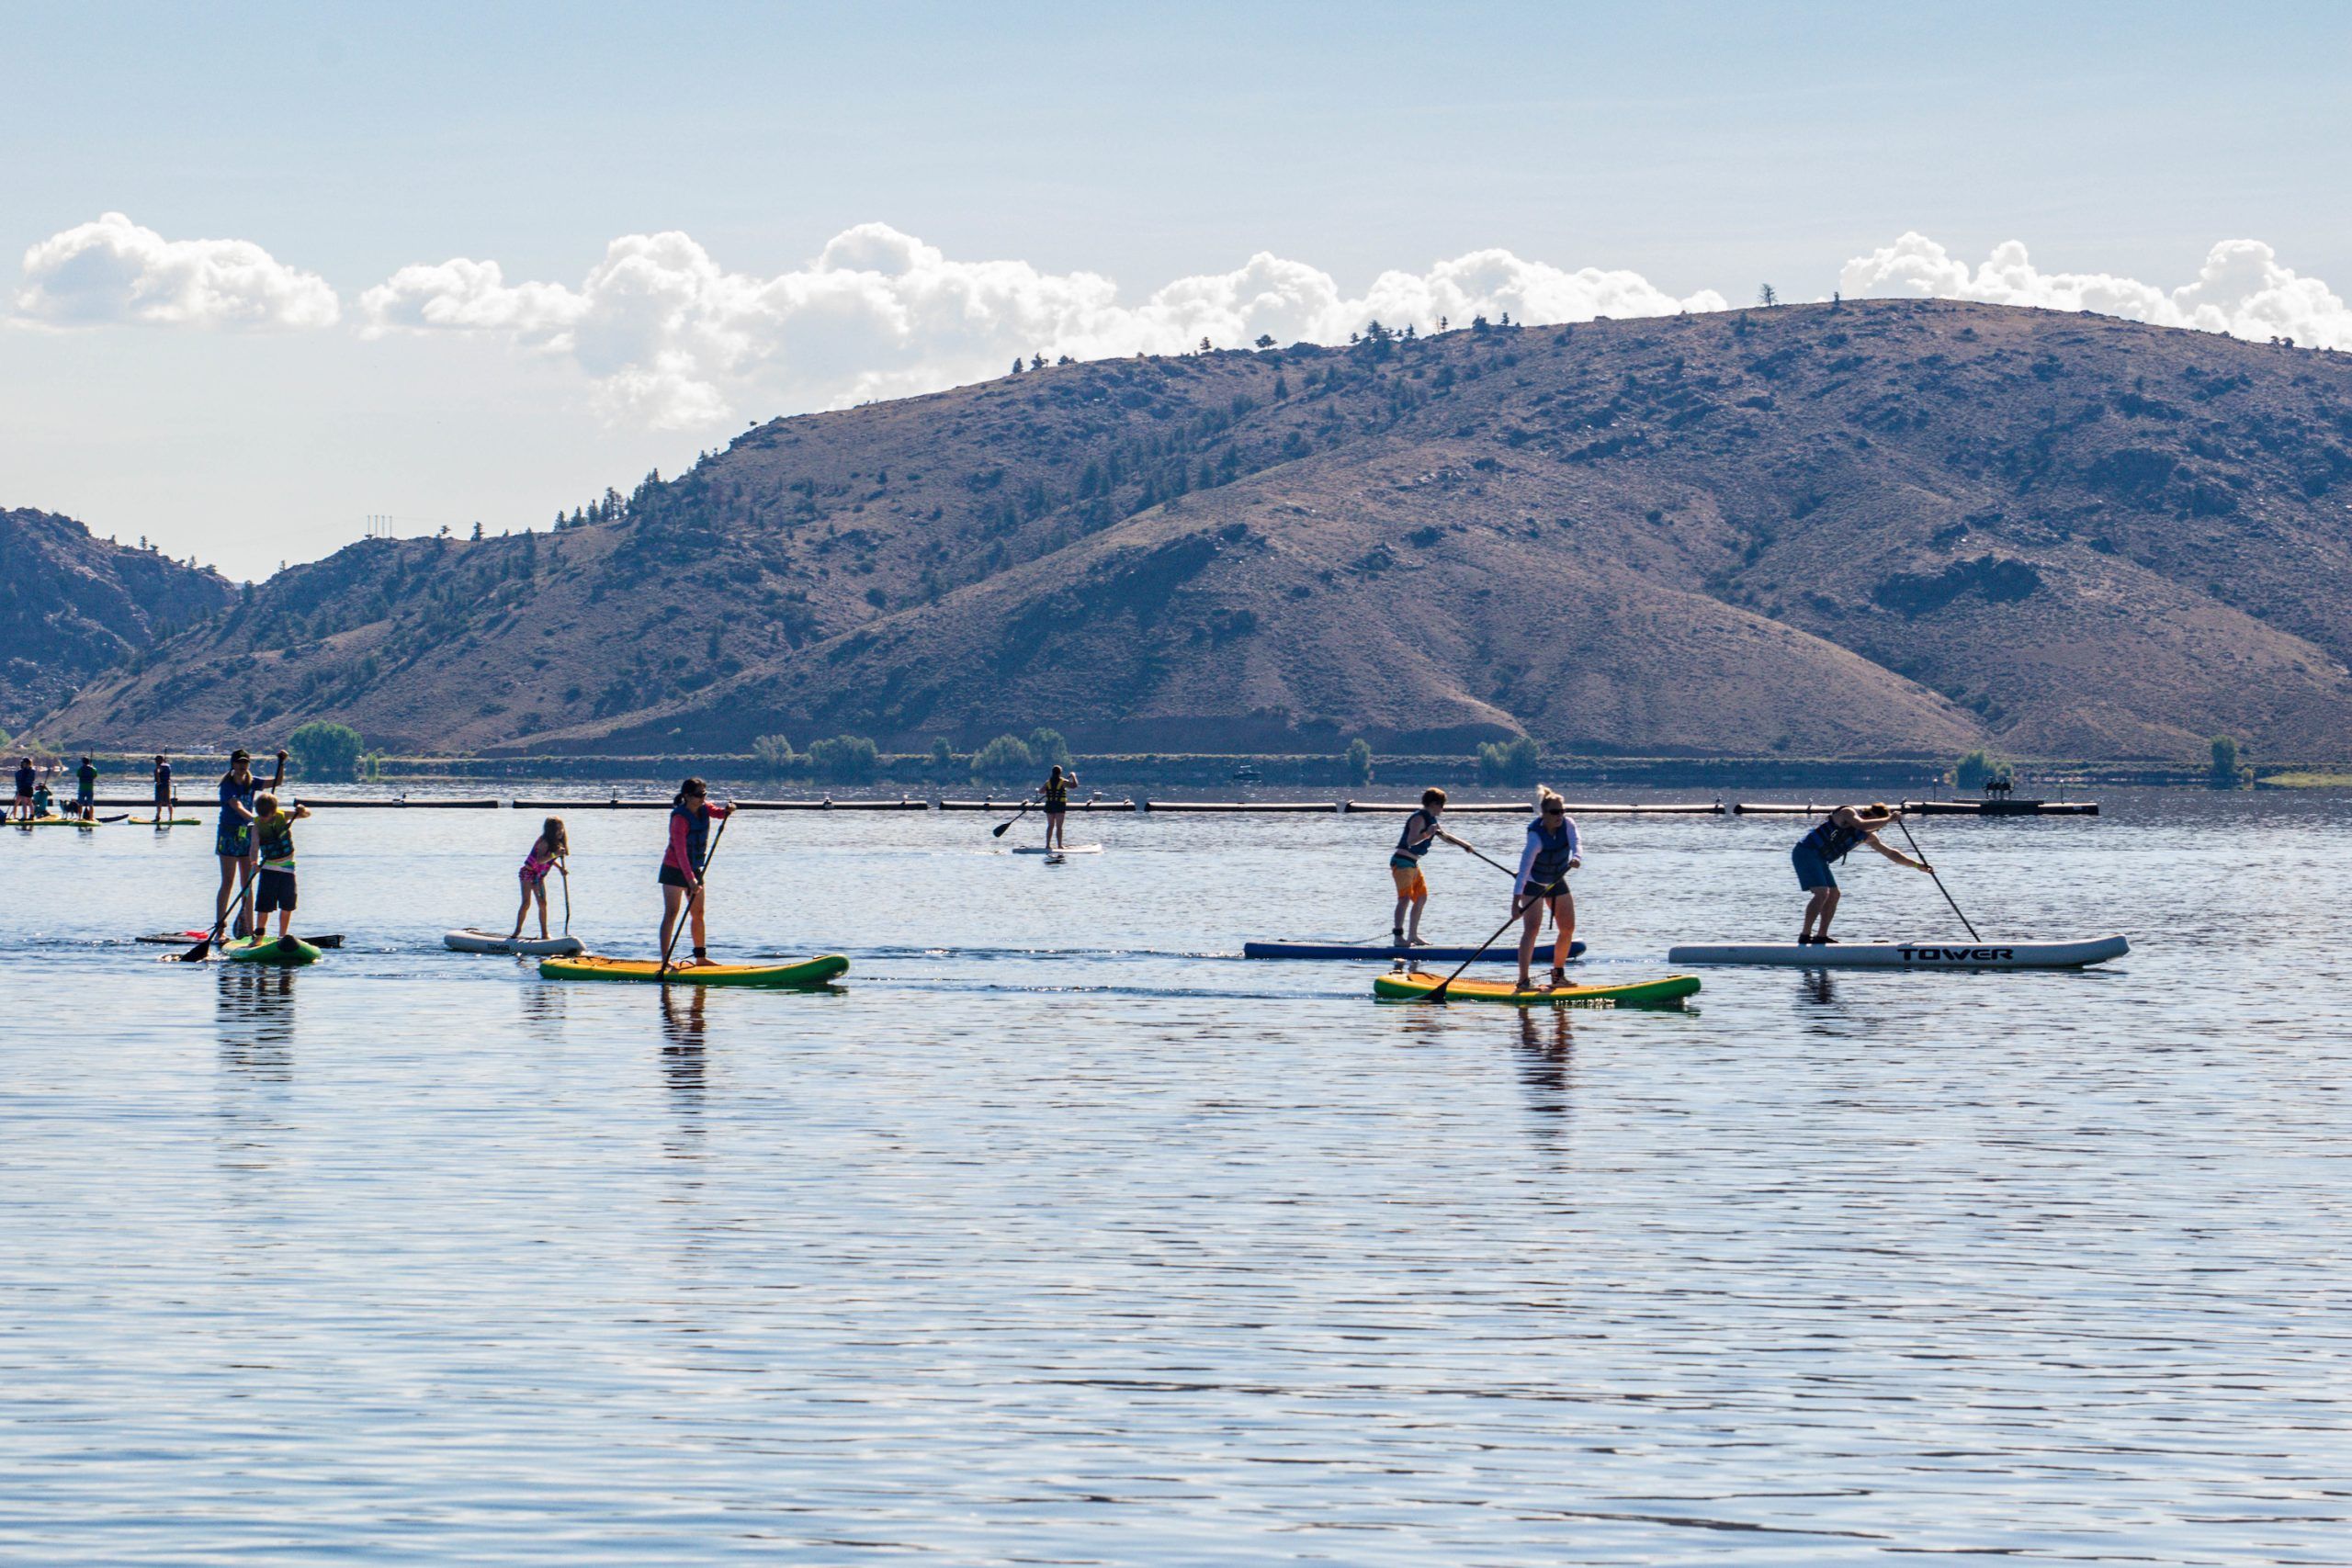 A group of people on stand-up paddle boards on a lake SUP on Blue Mesa Colorado